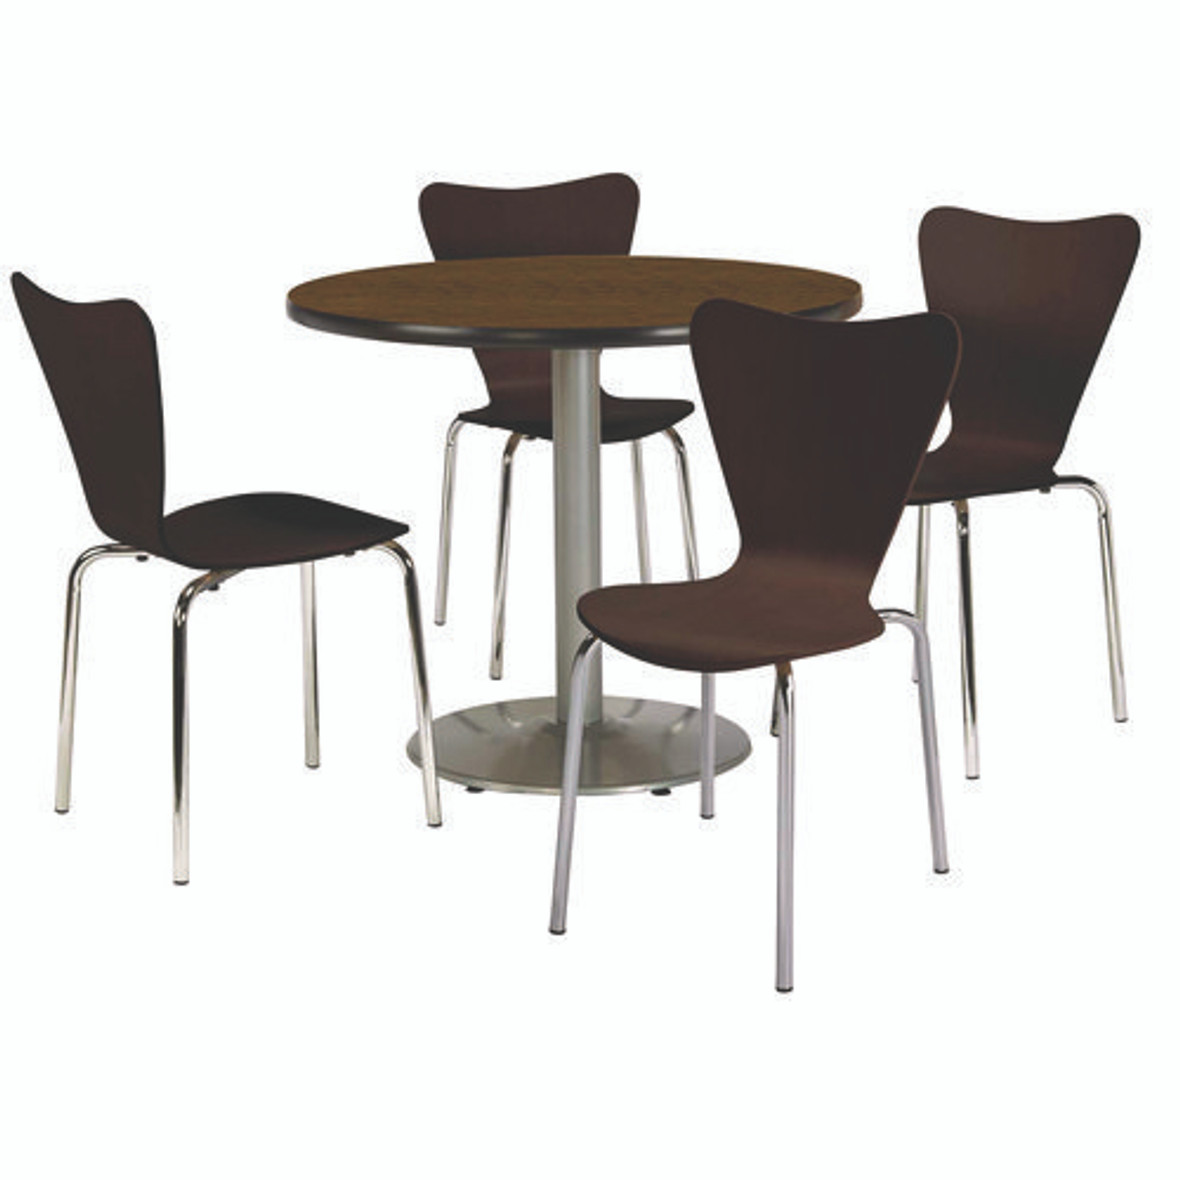 KFI Studios Pedestal Table With Four Espresso Jive Series Chairs, Round, 36" Dia X 29h, Walnut, Ships In 4-6 Business Days